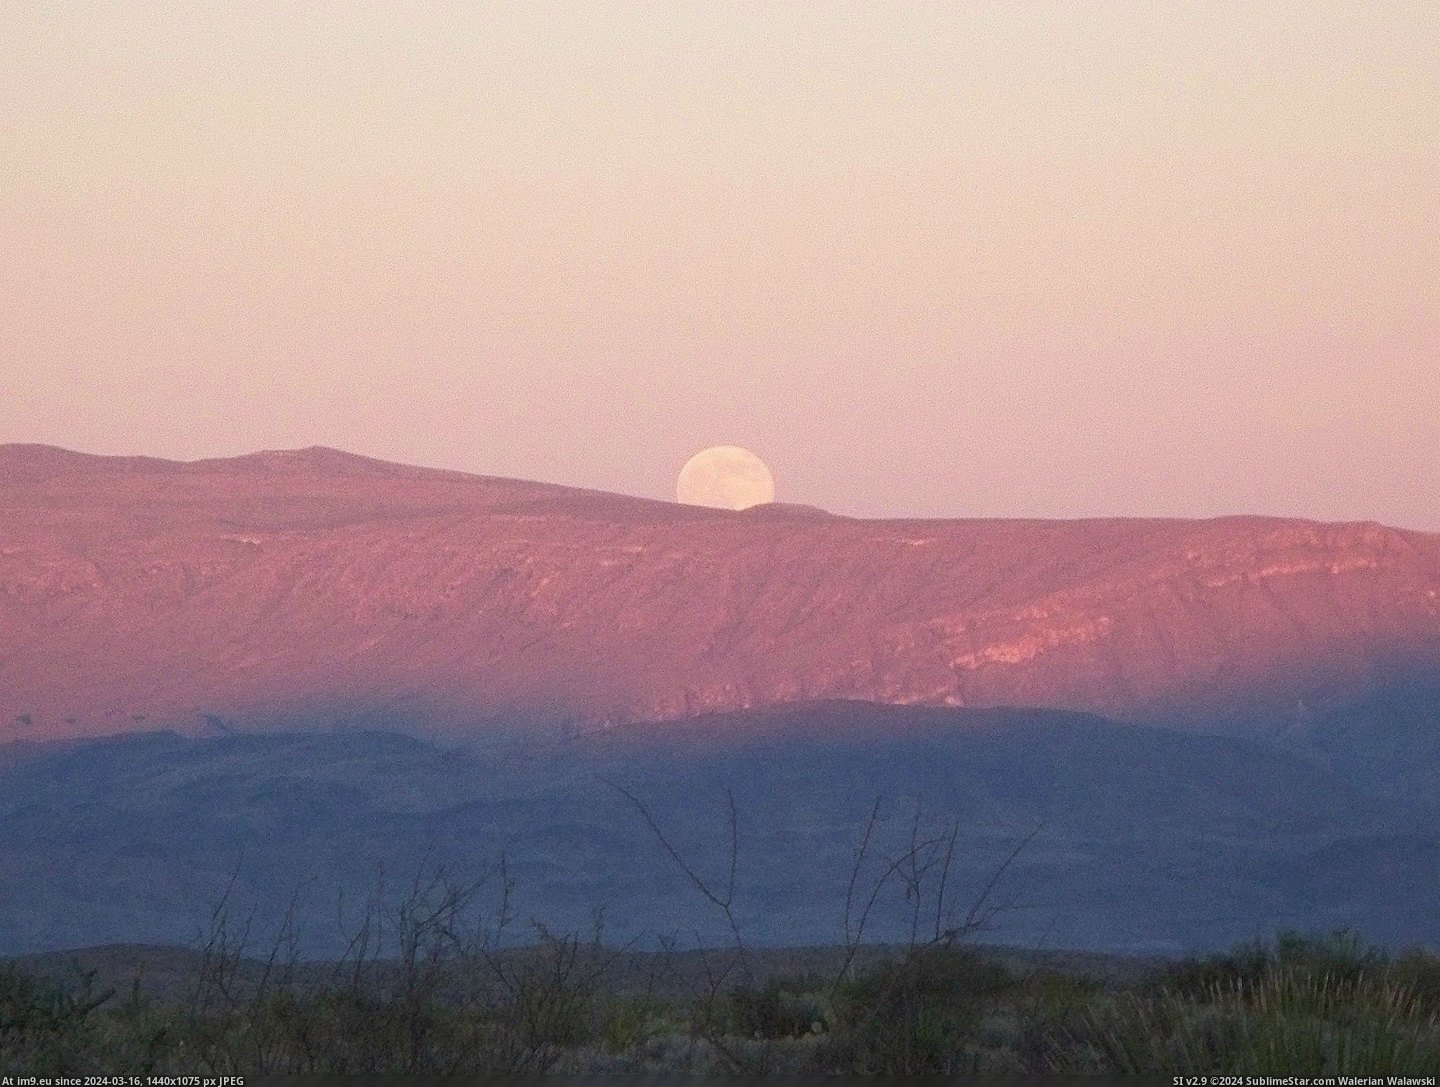 #Big #Park #Bend #Moonrise #National #Sunset [Earthporn] Moonrise opposite sunset, Big Bend National Park [2832 x 2128] [OC] Pic. (Image of album My r/EARTHPORN favs))